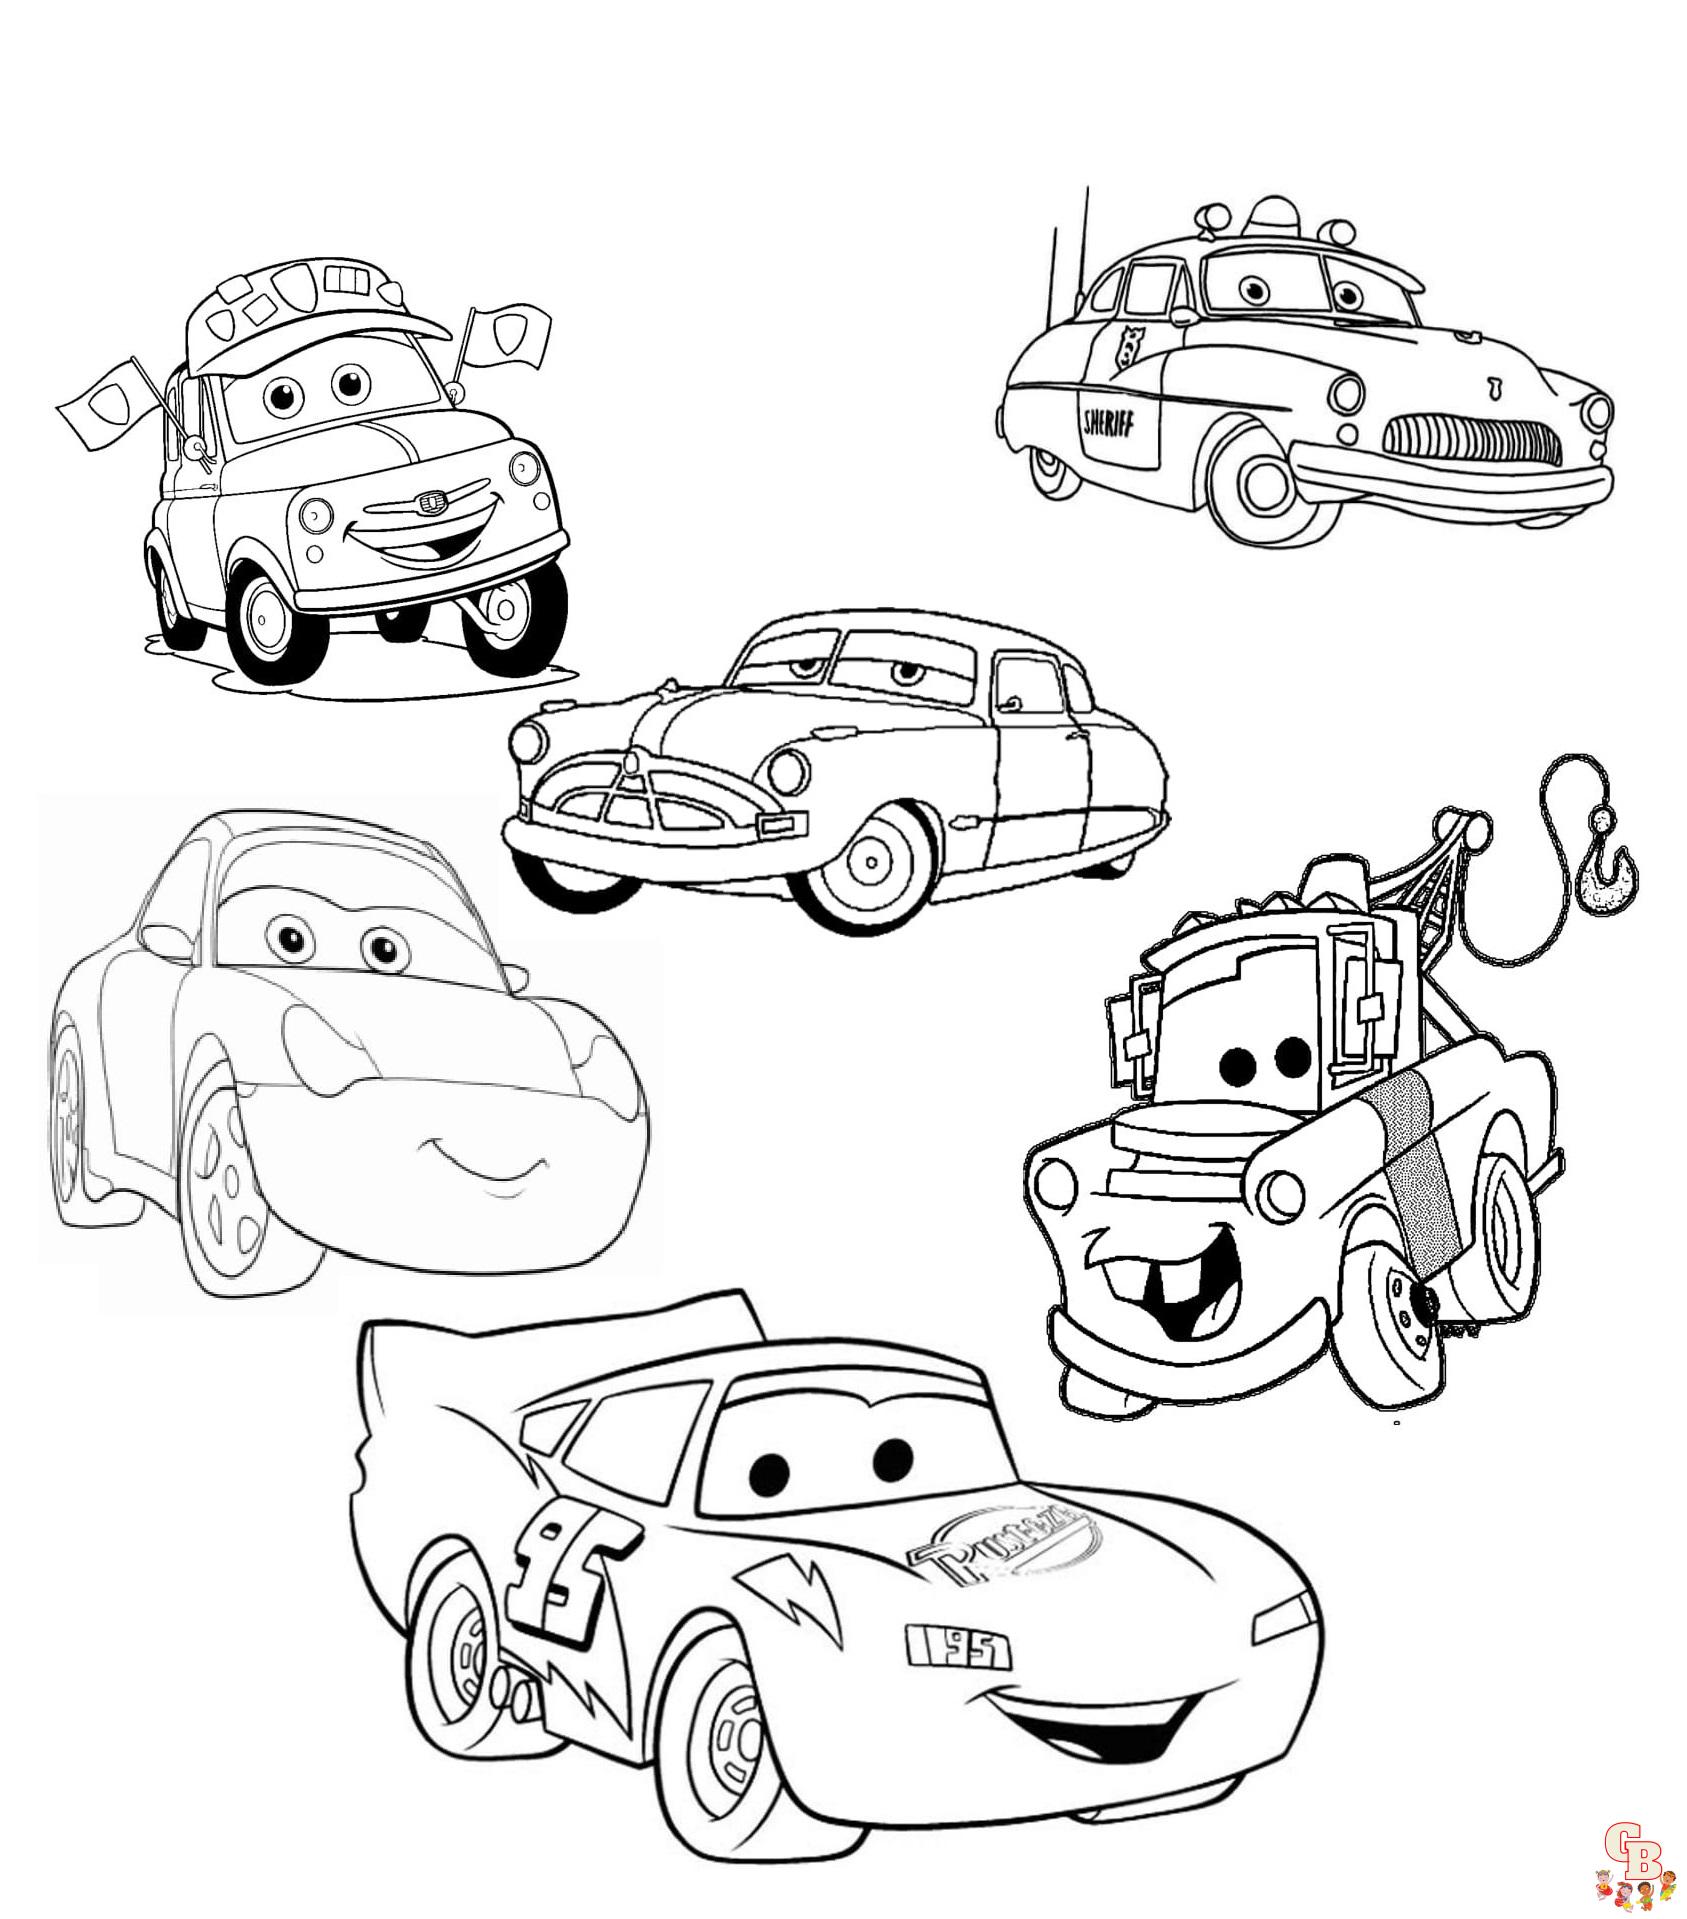 Disney Cars Coloring Pages Printable | Gbcoloring